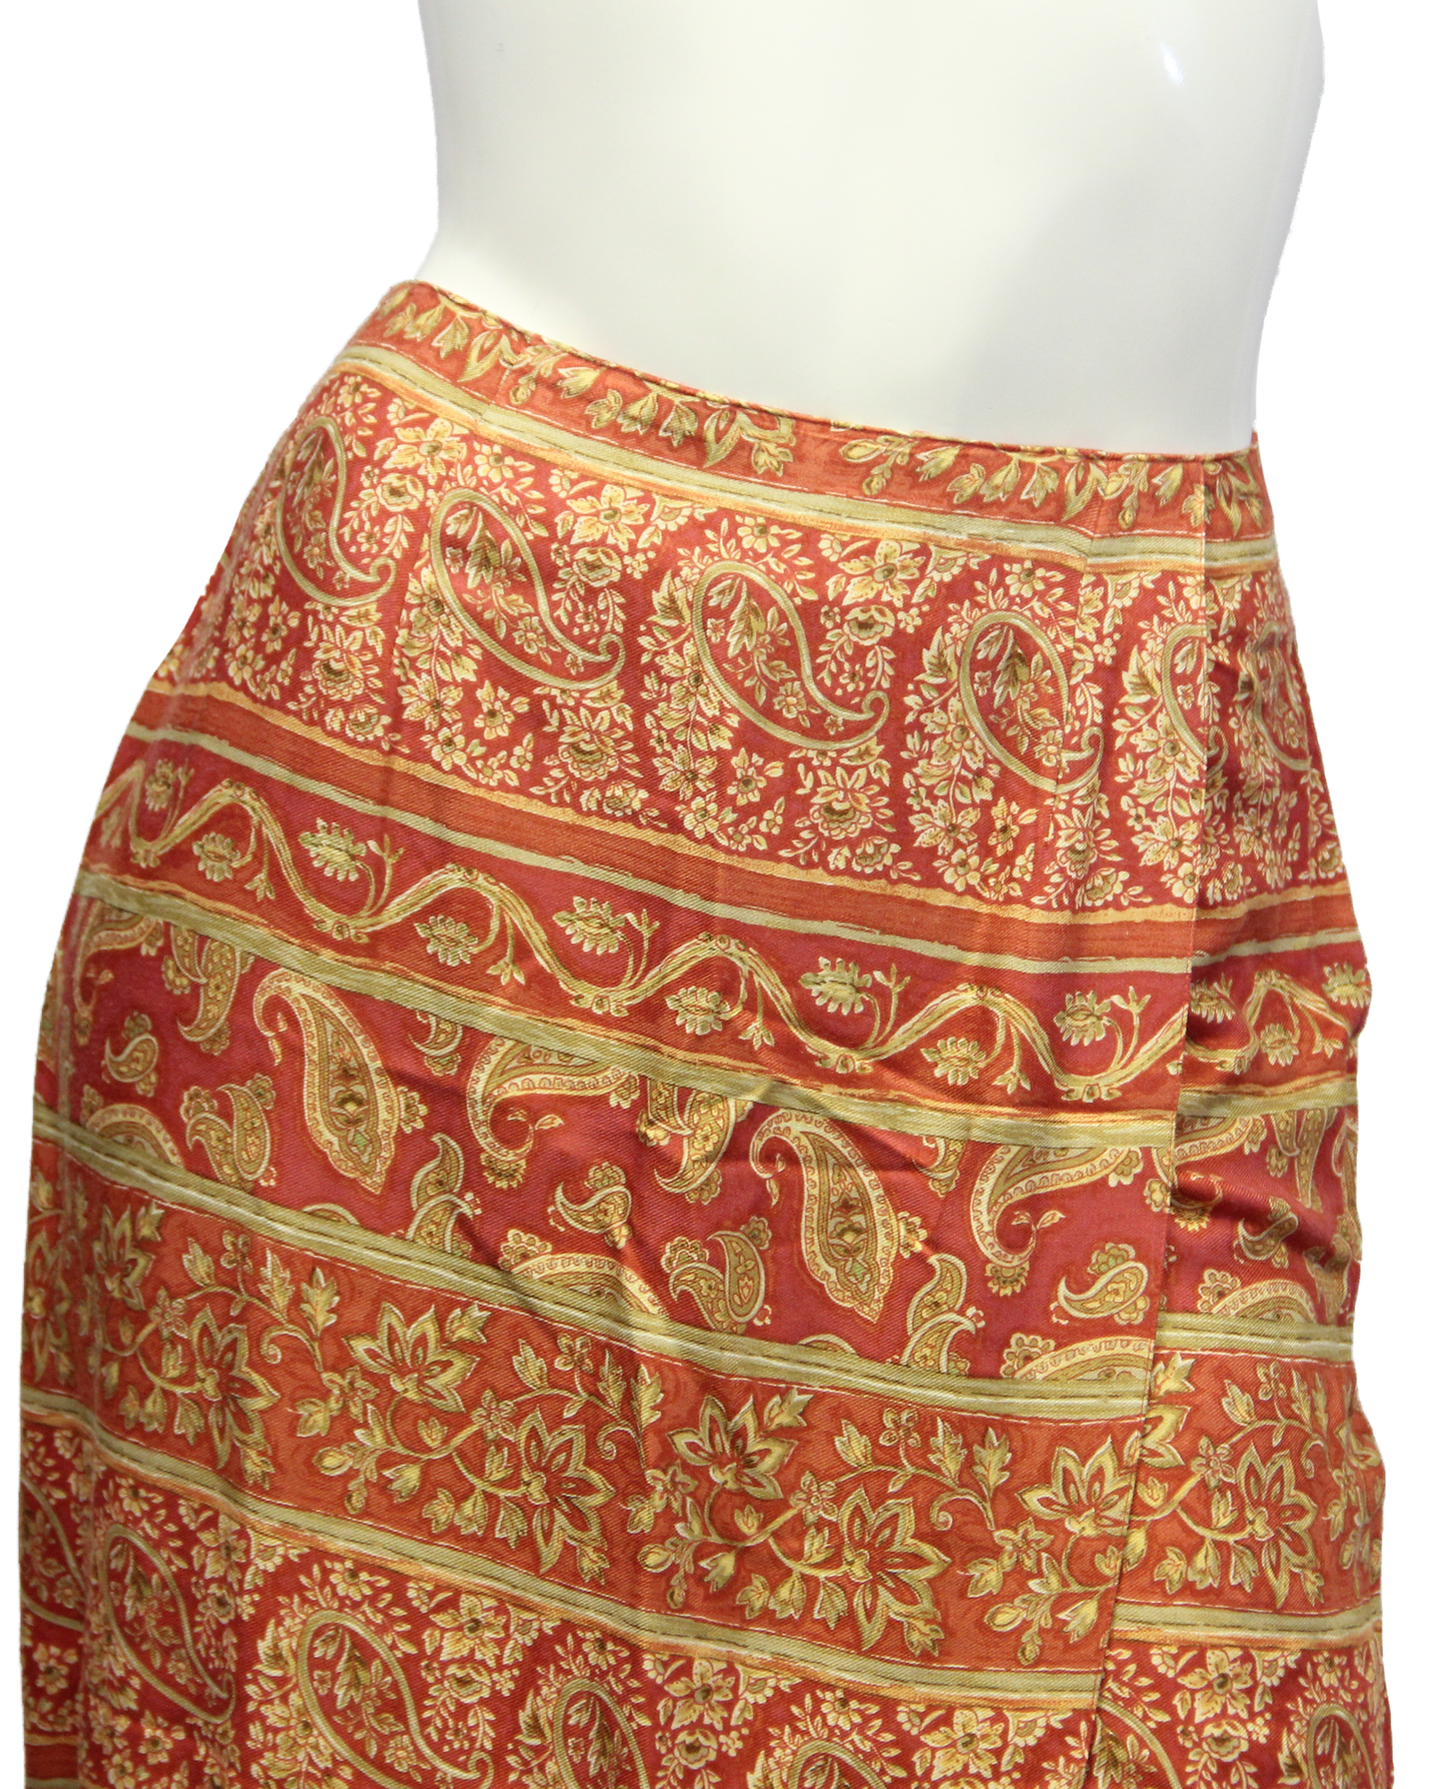 Load image into Gallery viewer, Talbots Wrap Around Skirt Size 4P (SKU 000028) - Designers On A Dime - 2
